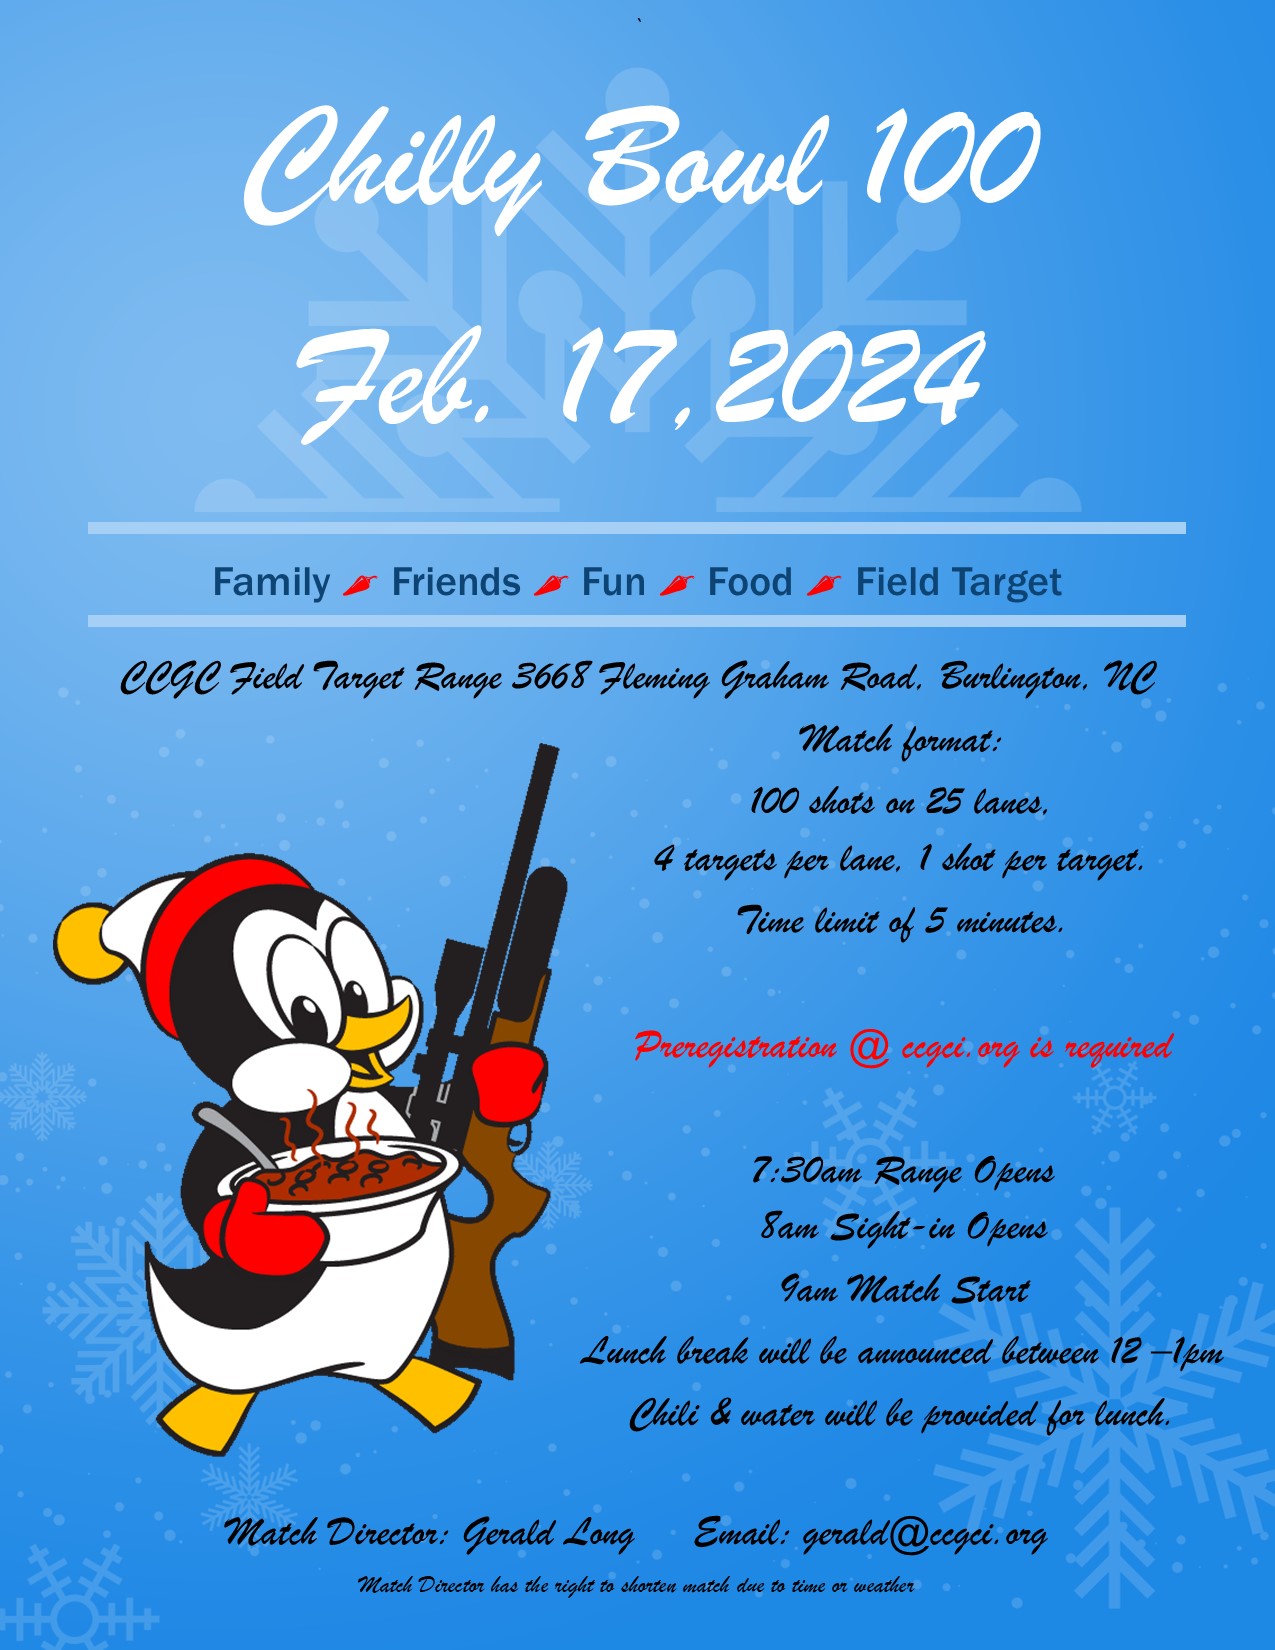 2024 CCGCI FT Chilly Bowl 100 flier publisher_web.jpg